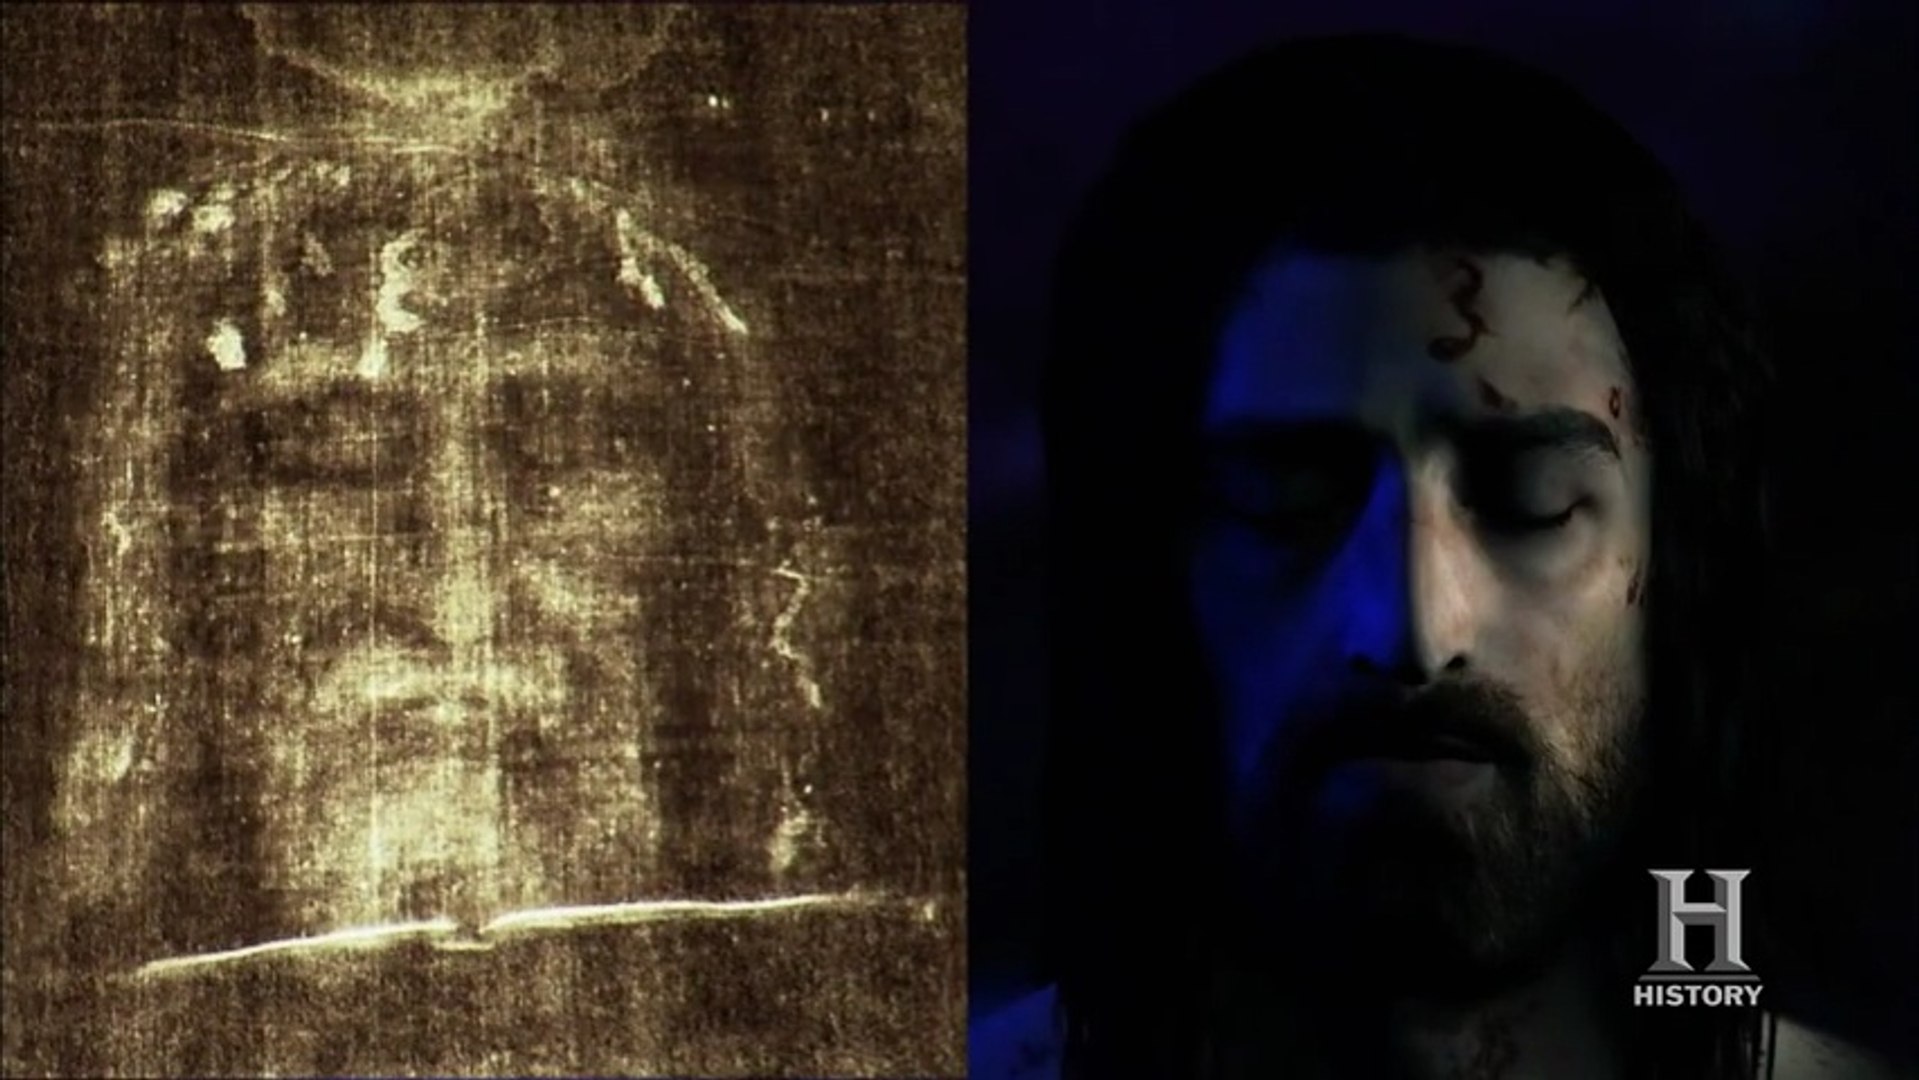 Jesus shroud face of The Two